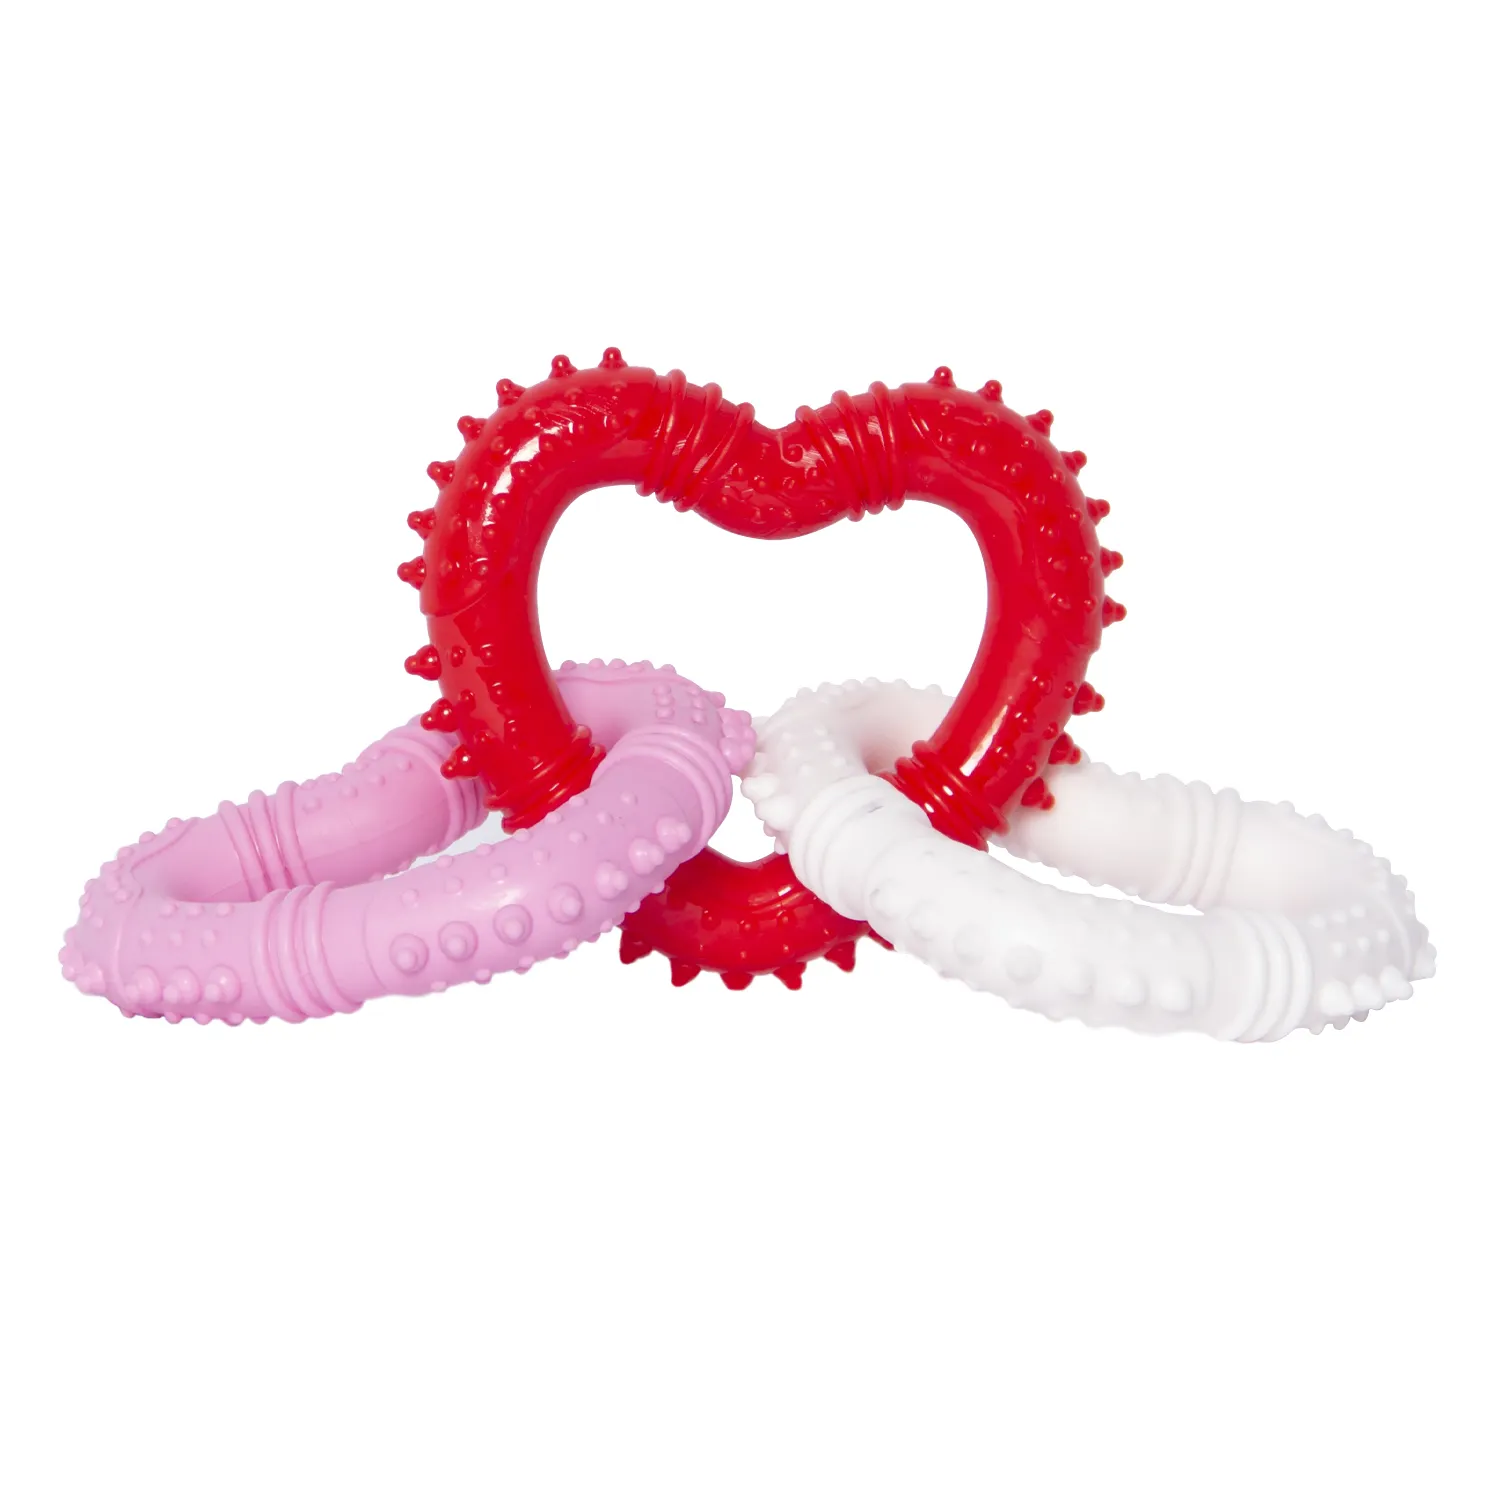 Chewing Durable Hot Sale New Colorful Durable Solid Dog Chewing Tpr Toys For Dog + Squeaker Pet Chew Toys Valentine Heart